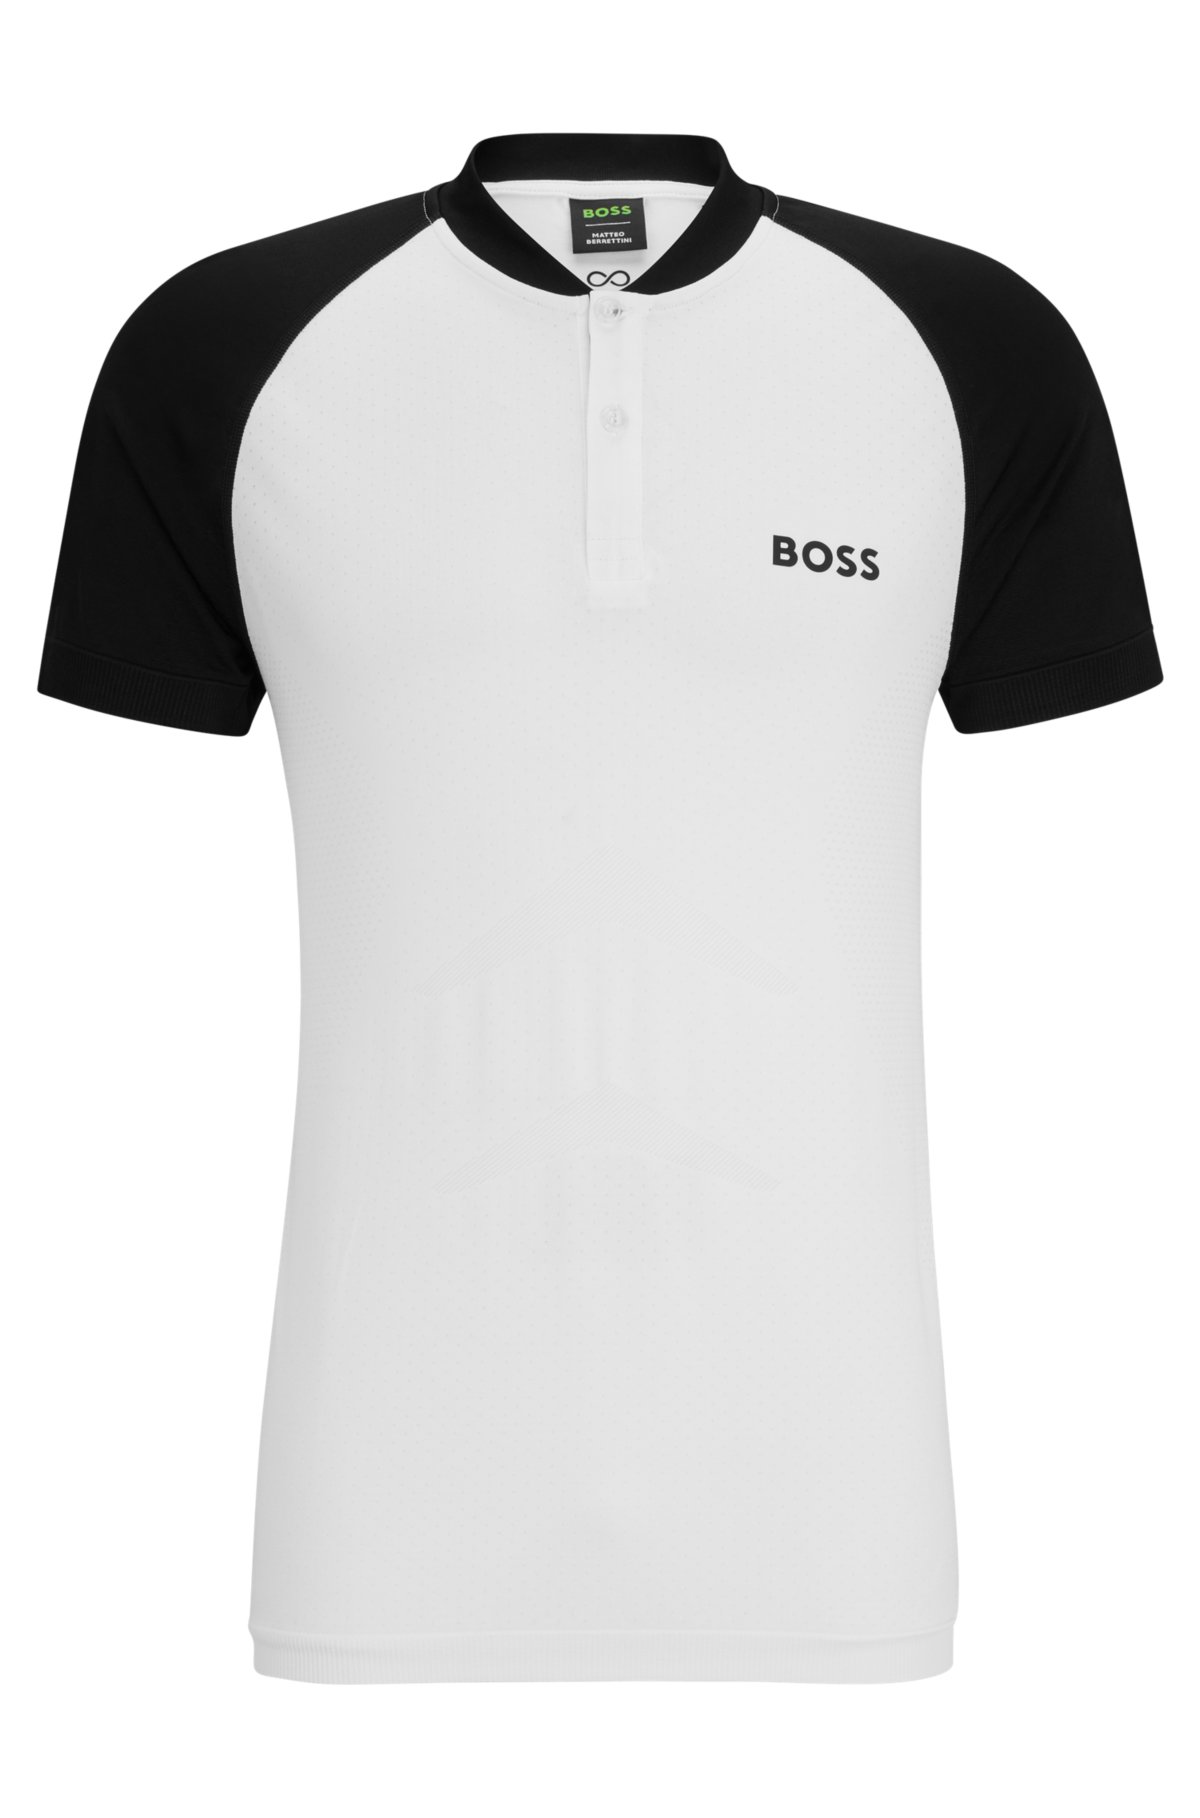 BOSS - Slim-fit long-sleeved polo shirt with woven pattern